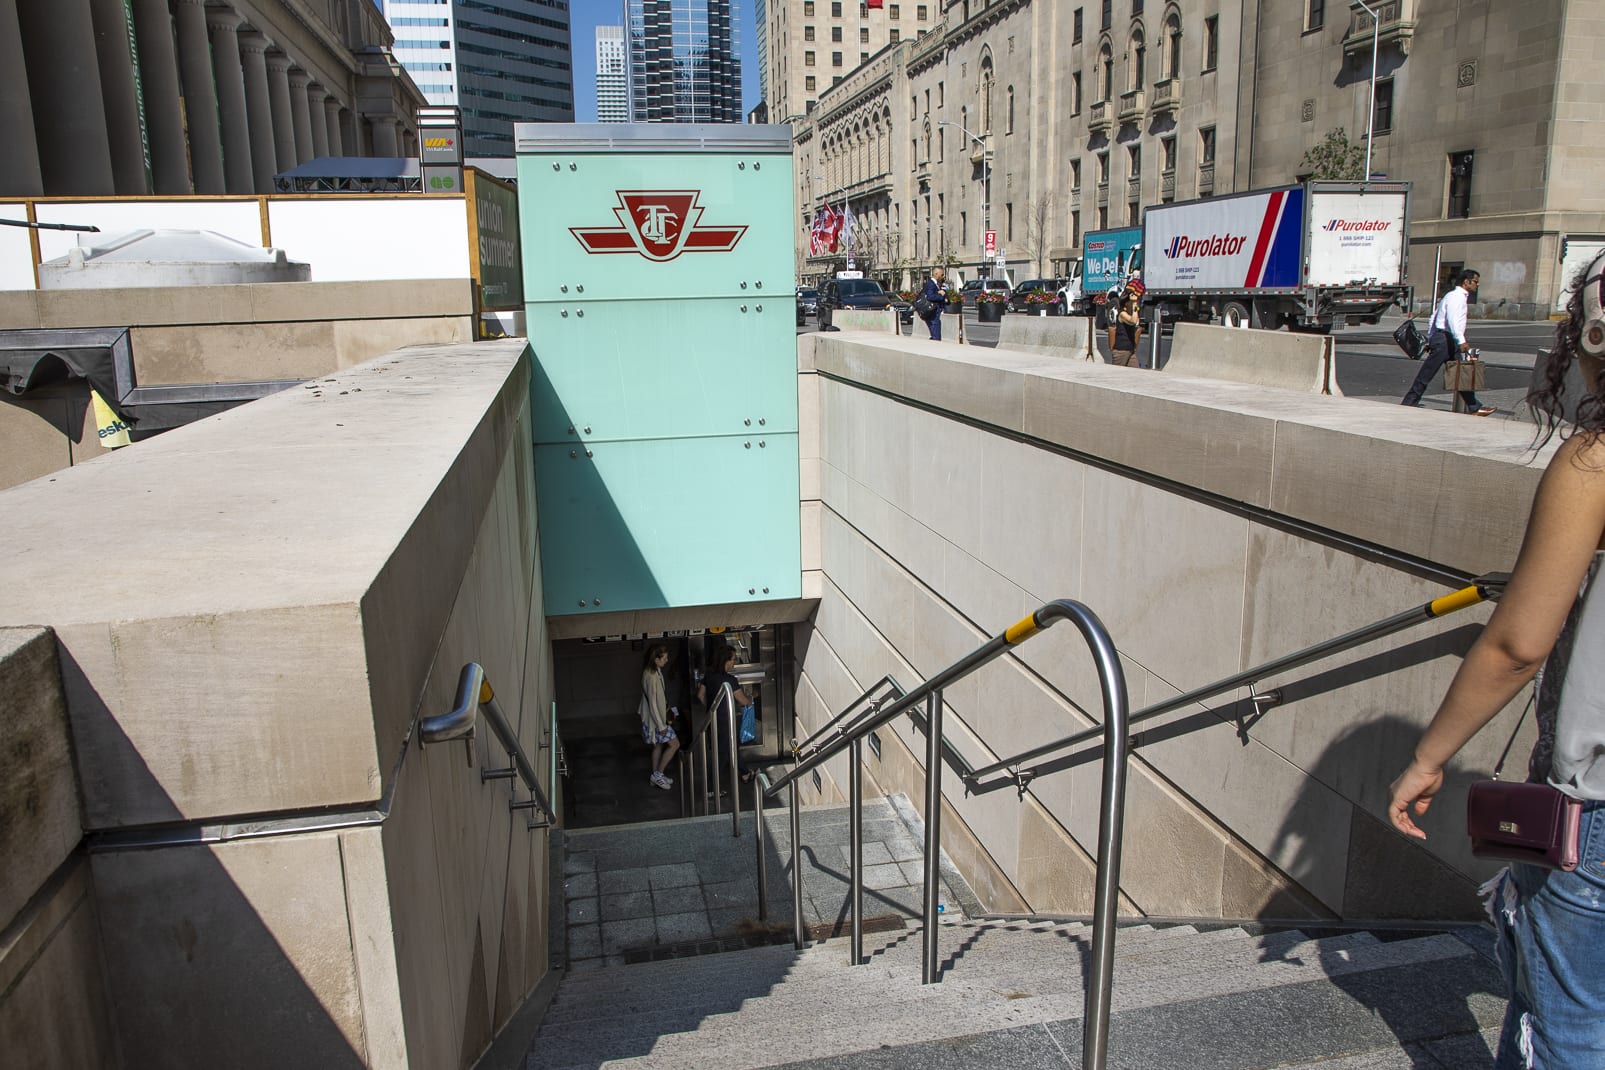 Union Station Update – ‘A better way’ to get to the TTC and a sign of progress in station?...